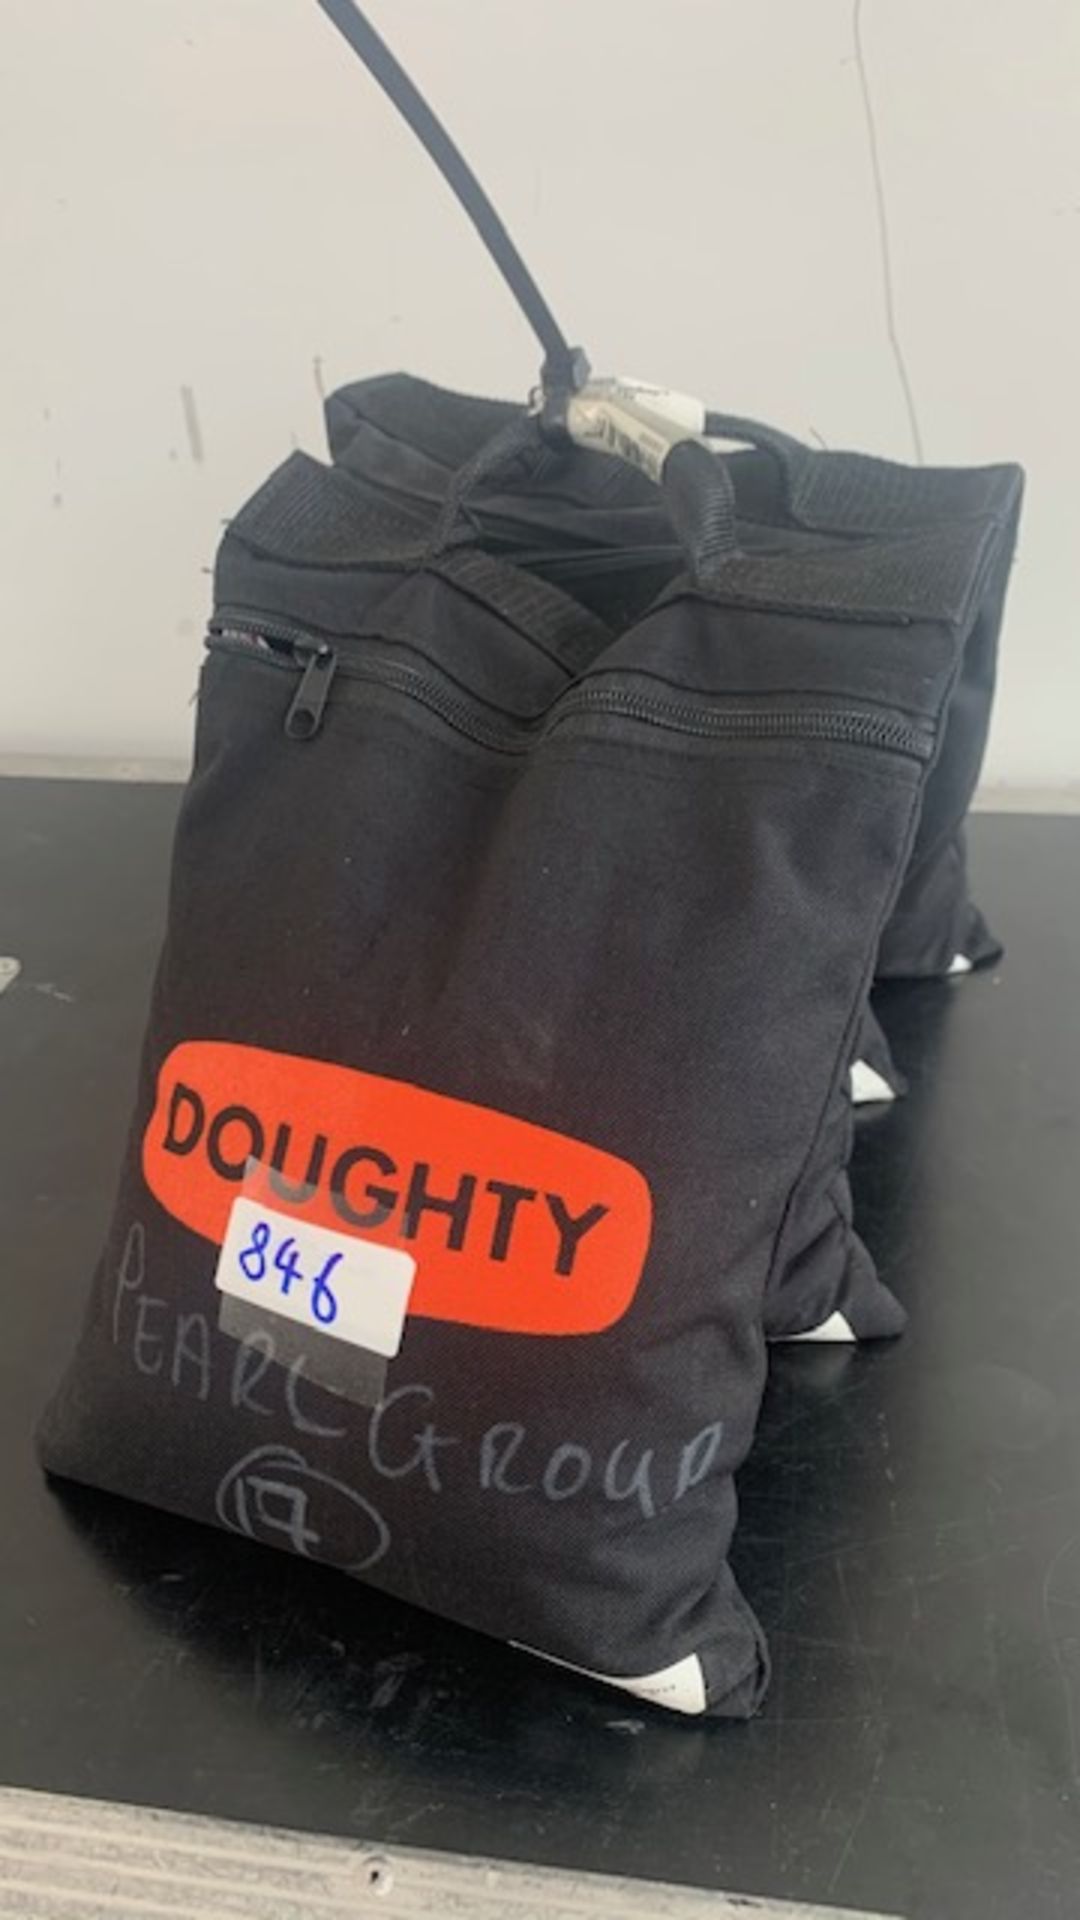 2 x Doughty 10kg Handled Sand Bag Weights - Ref: 846 - CL581 - Location: Altrincham WA14